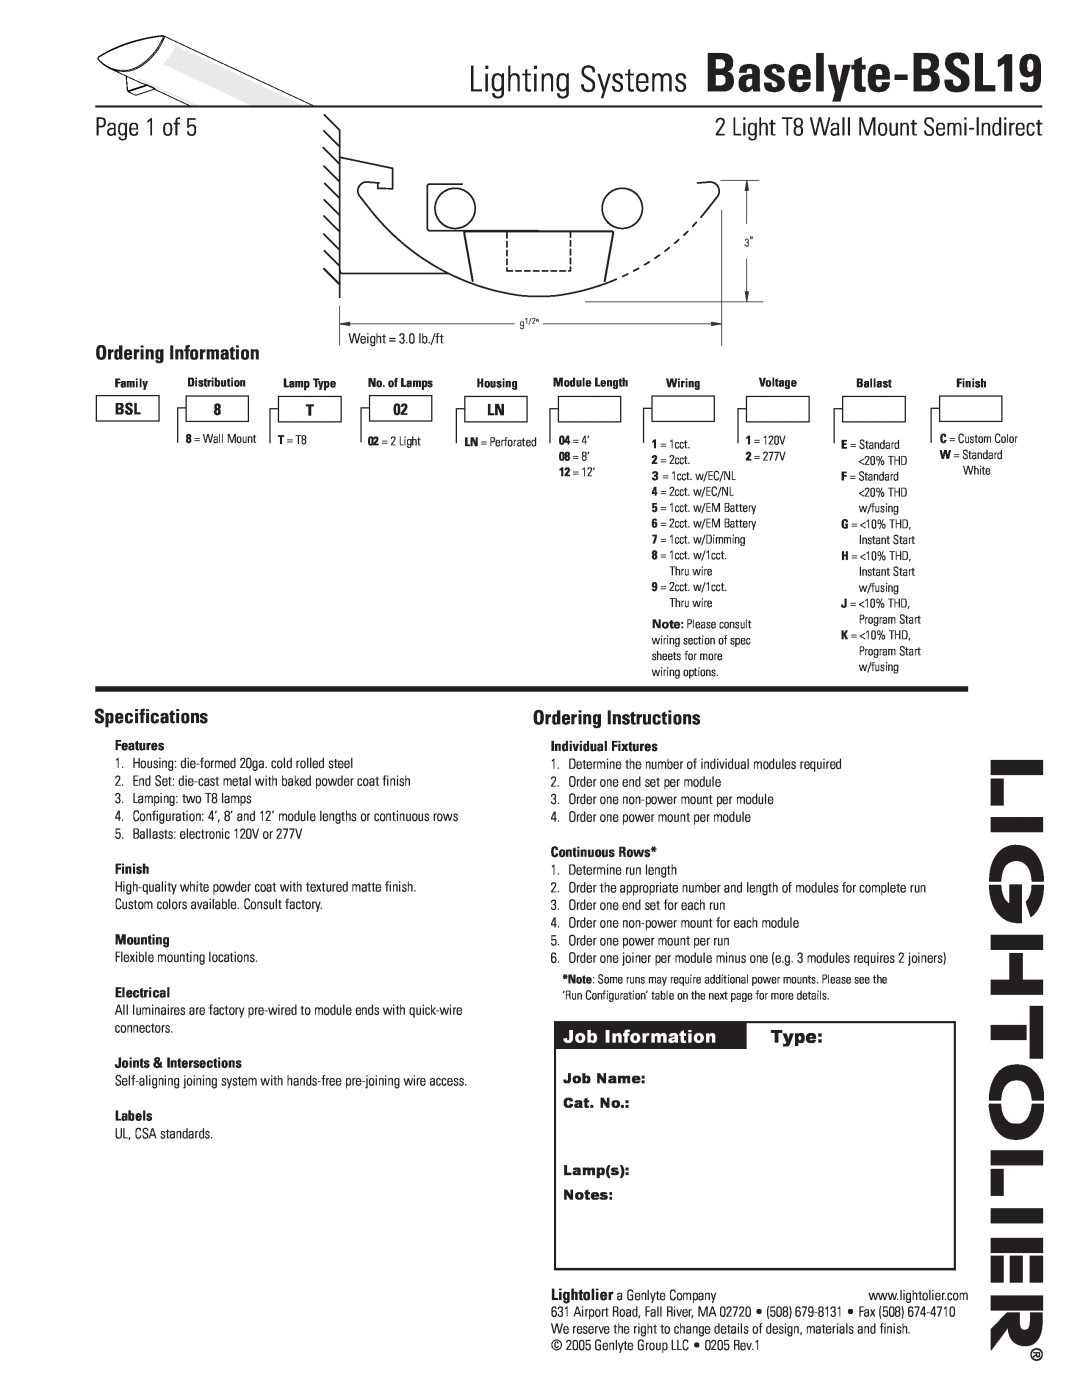 Lightolier specifications Lighting Systems Baselyte-BSL19, Page  of, Light T8 Wall Mount Semi-Indirect, Specifications 